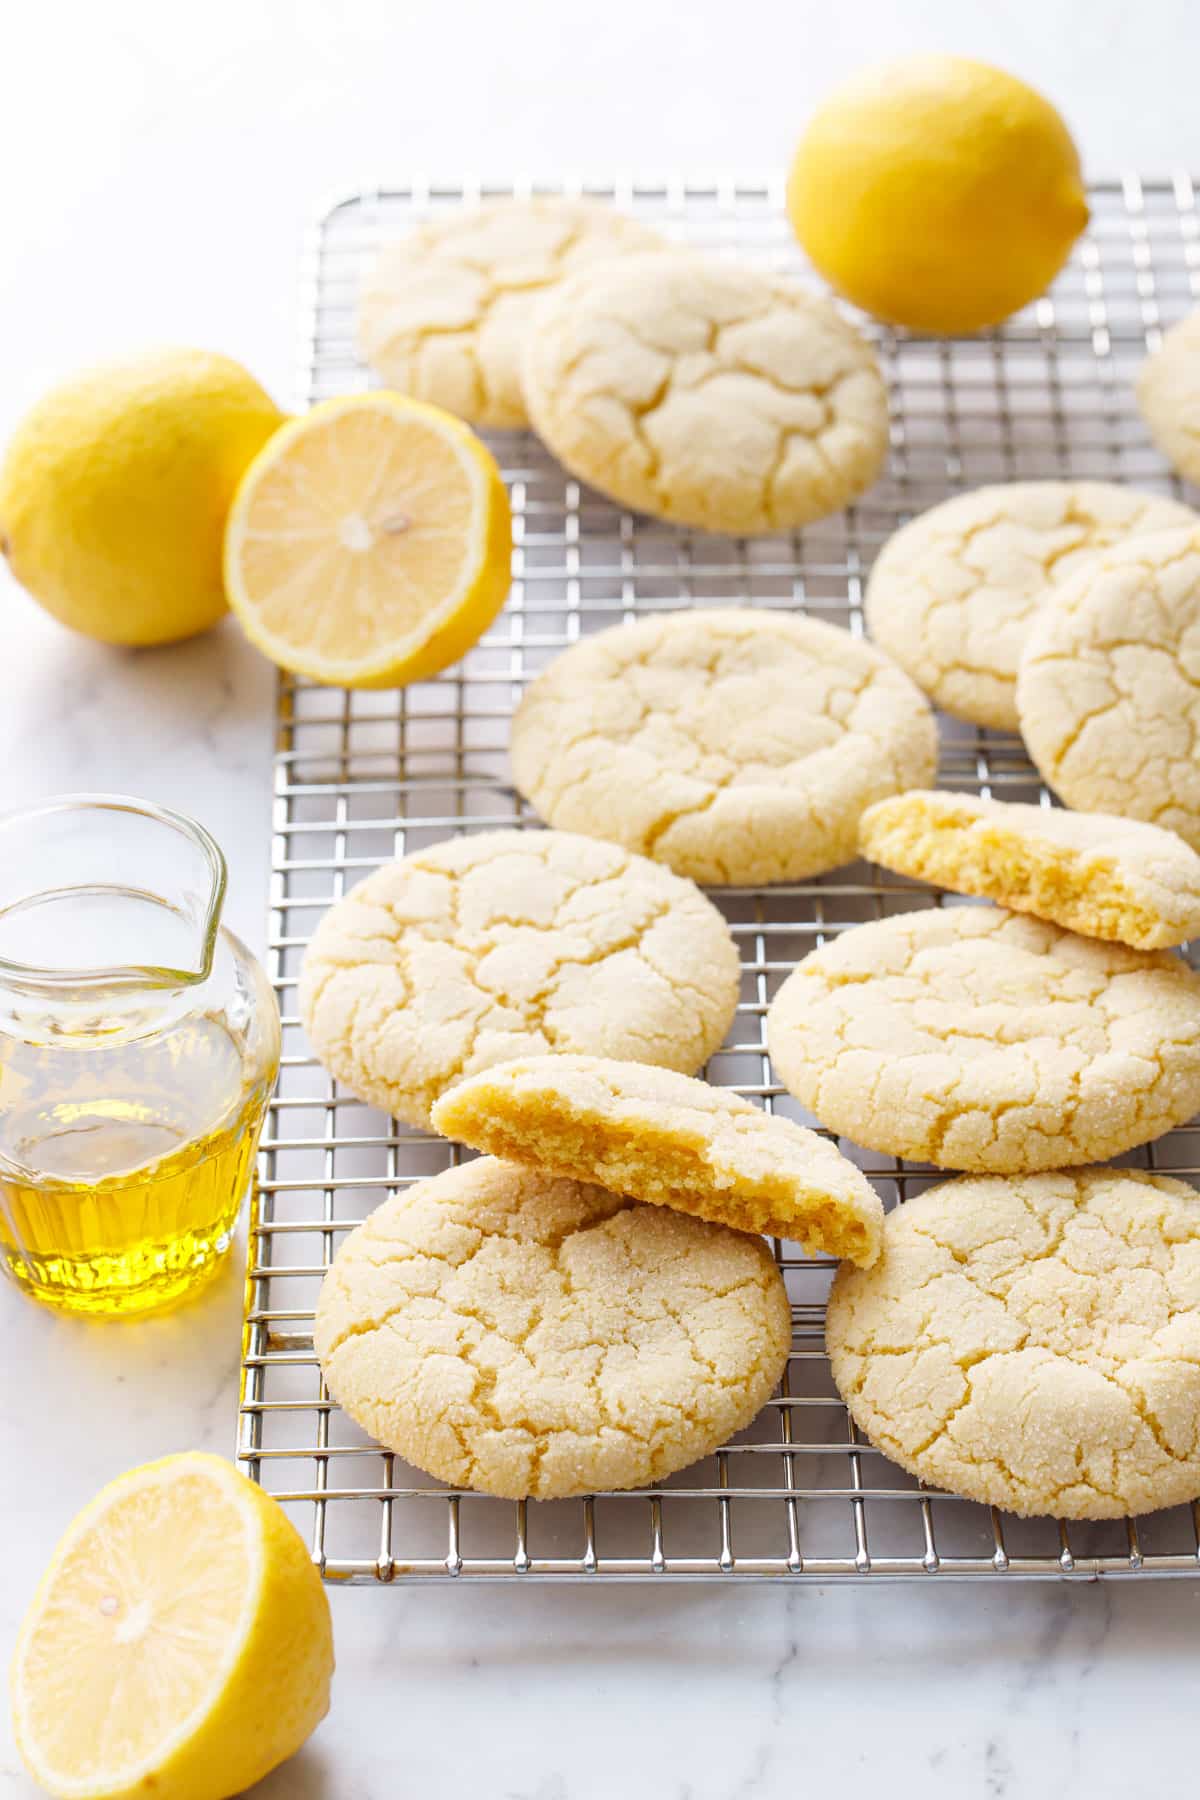 Lemon Olive Oil Sugar Cookies on a wire baking rack with crackly tops and a cookie broken in half to show the interior texture.